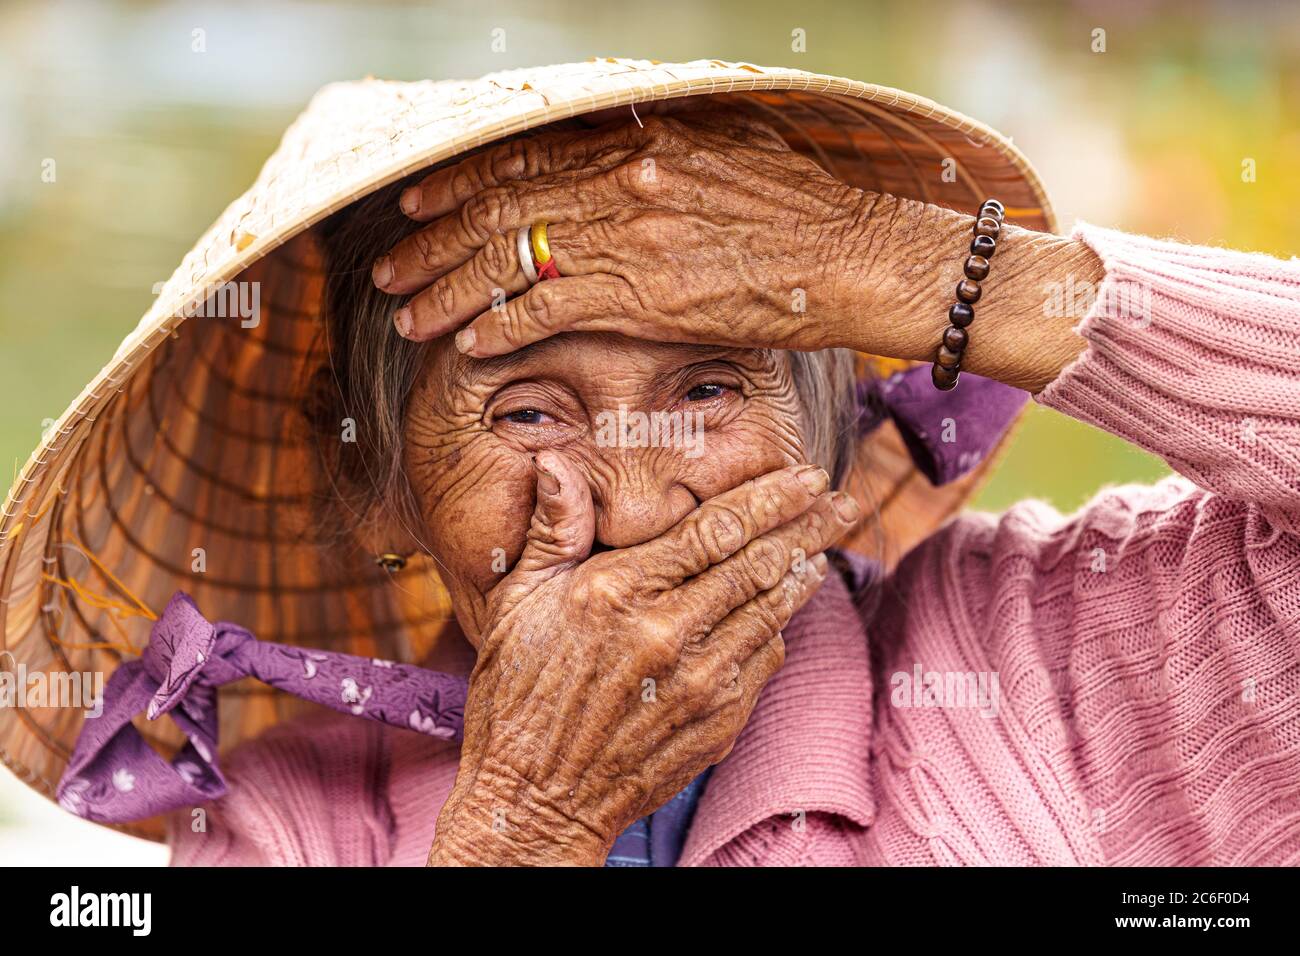 Old Vietnamese woman in violet sweater puts her hands to her face to cover her mouth and forehead. Stock Photo